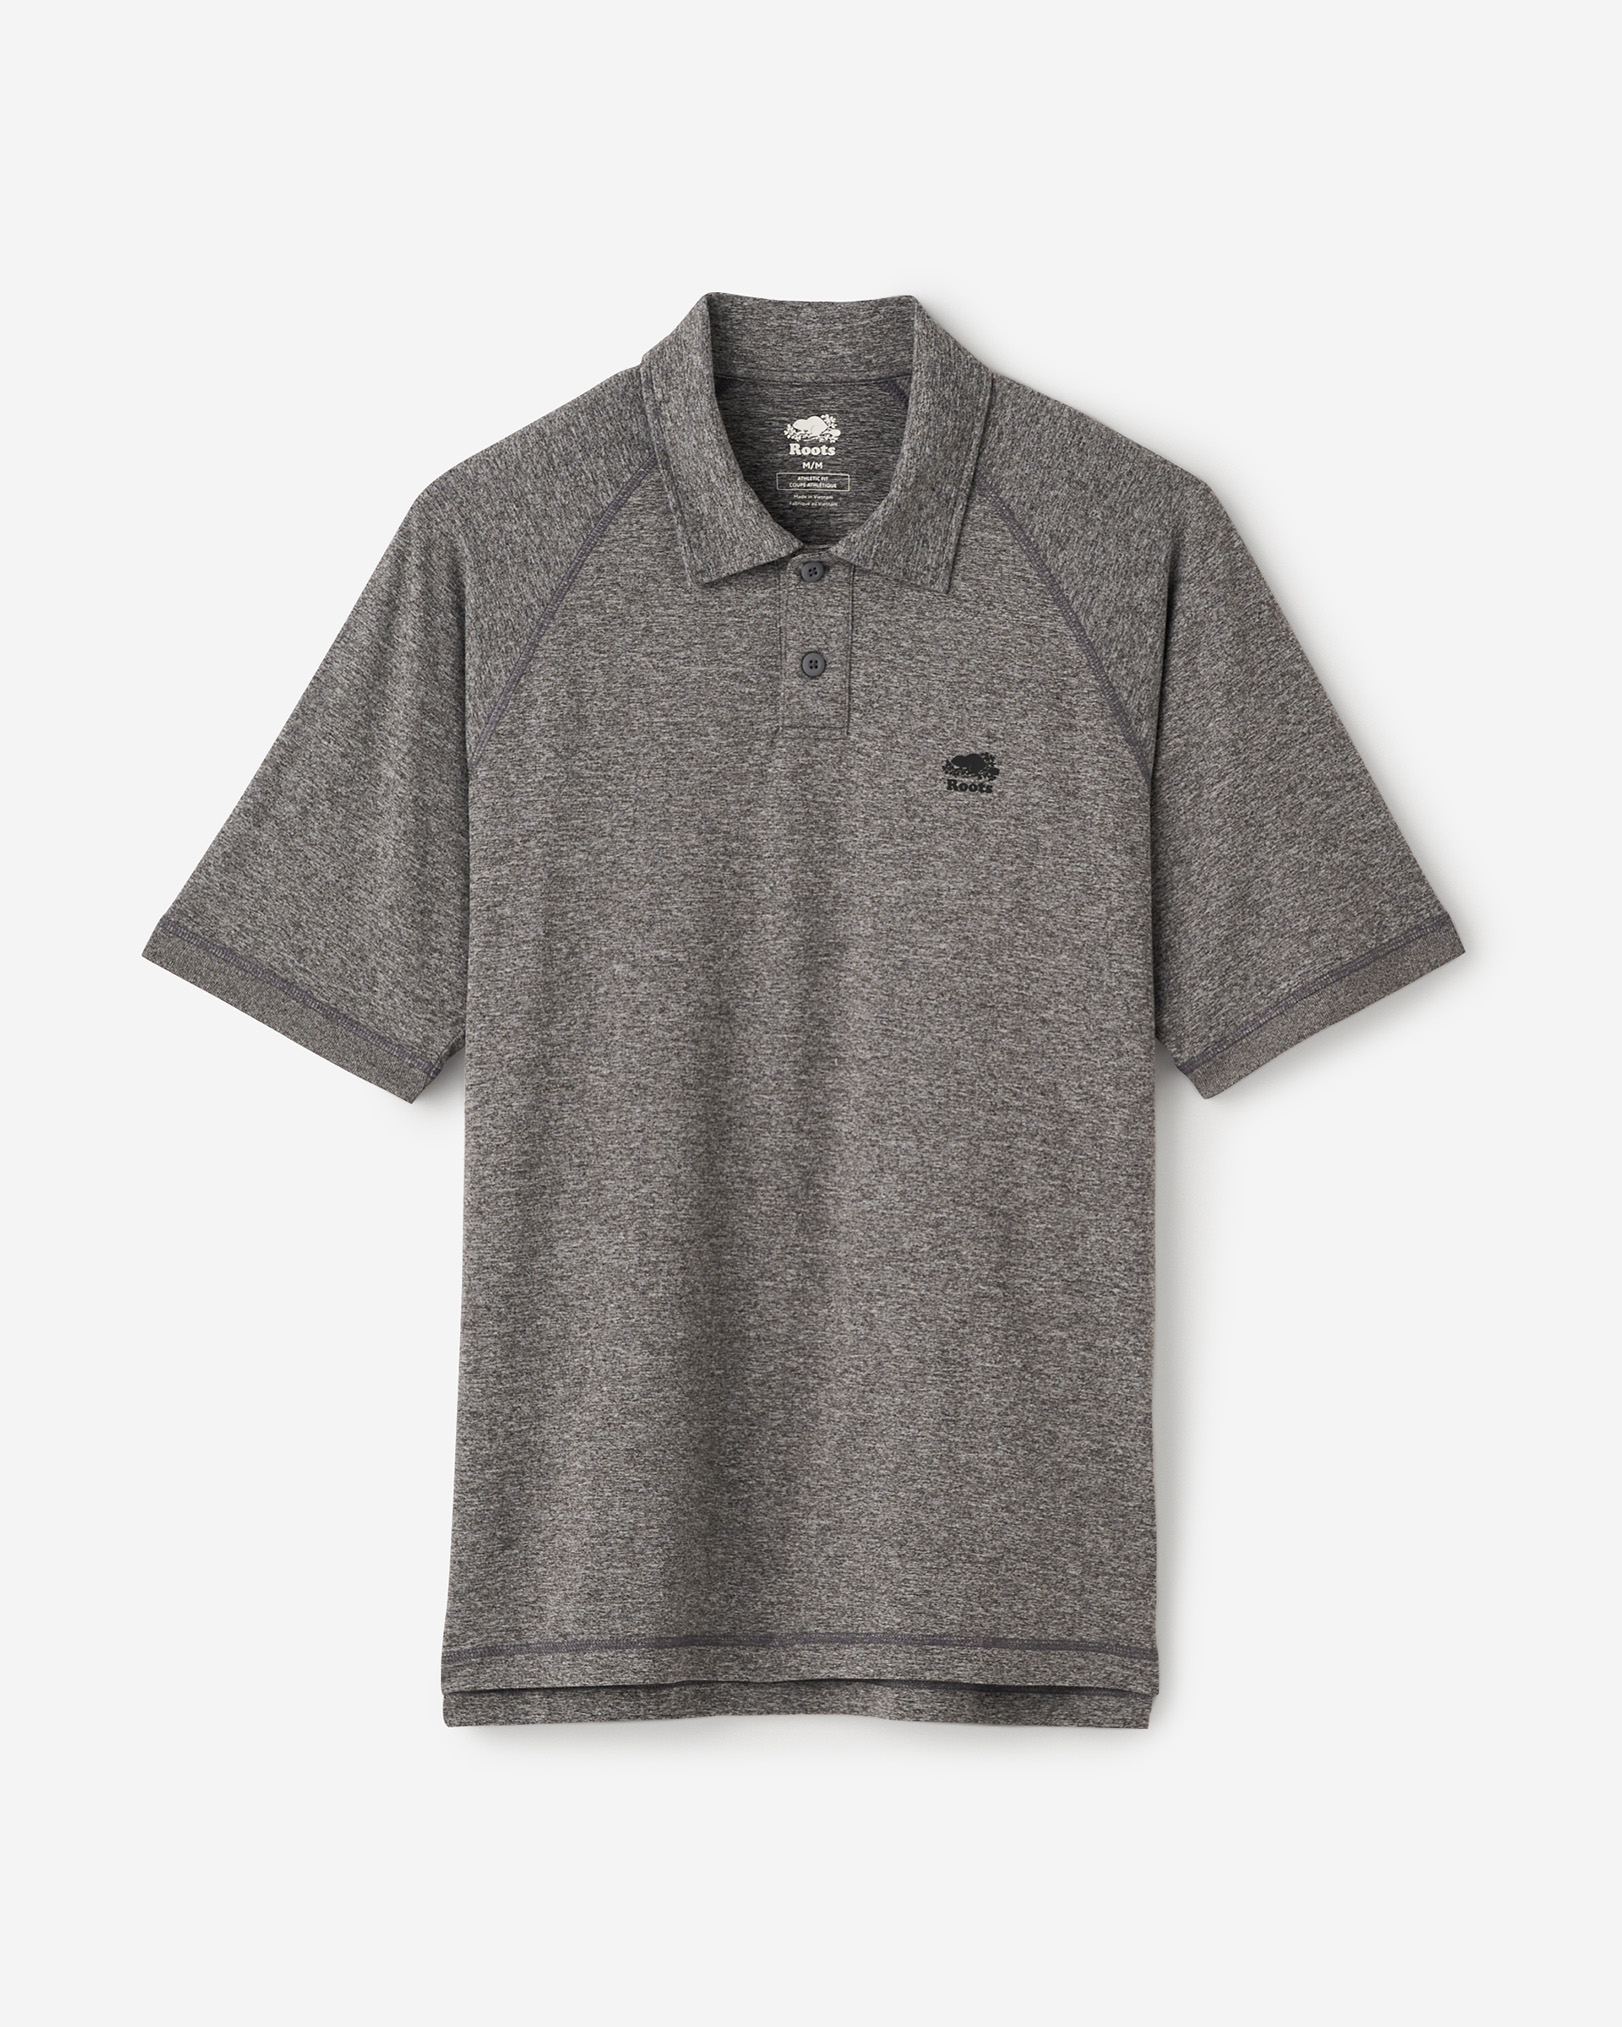 Roots Renew Peppered Polo T-Shirt in Salt/Pepper